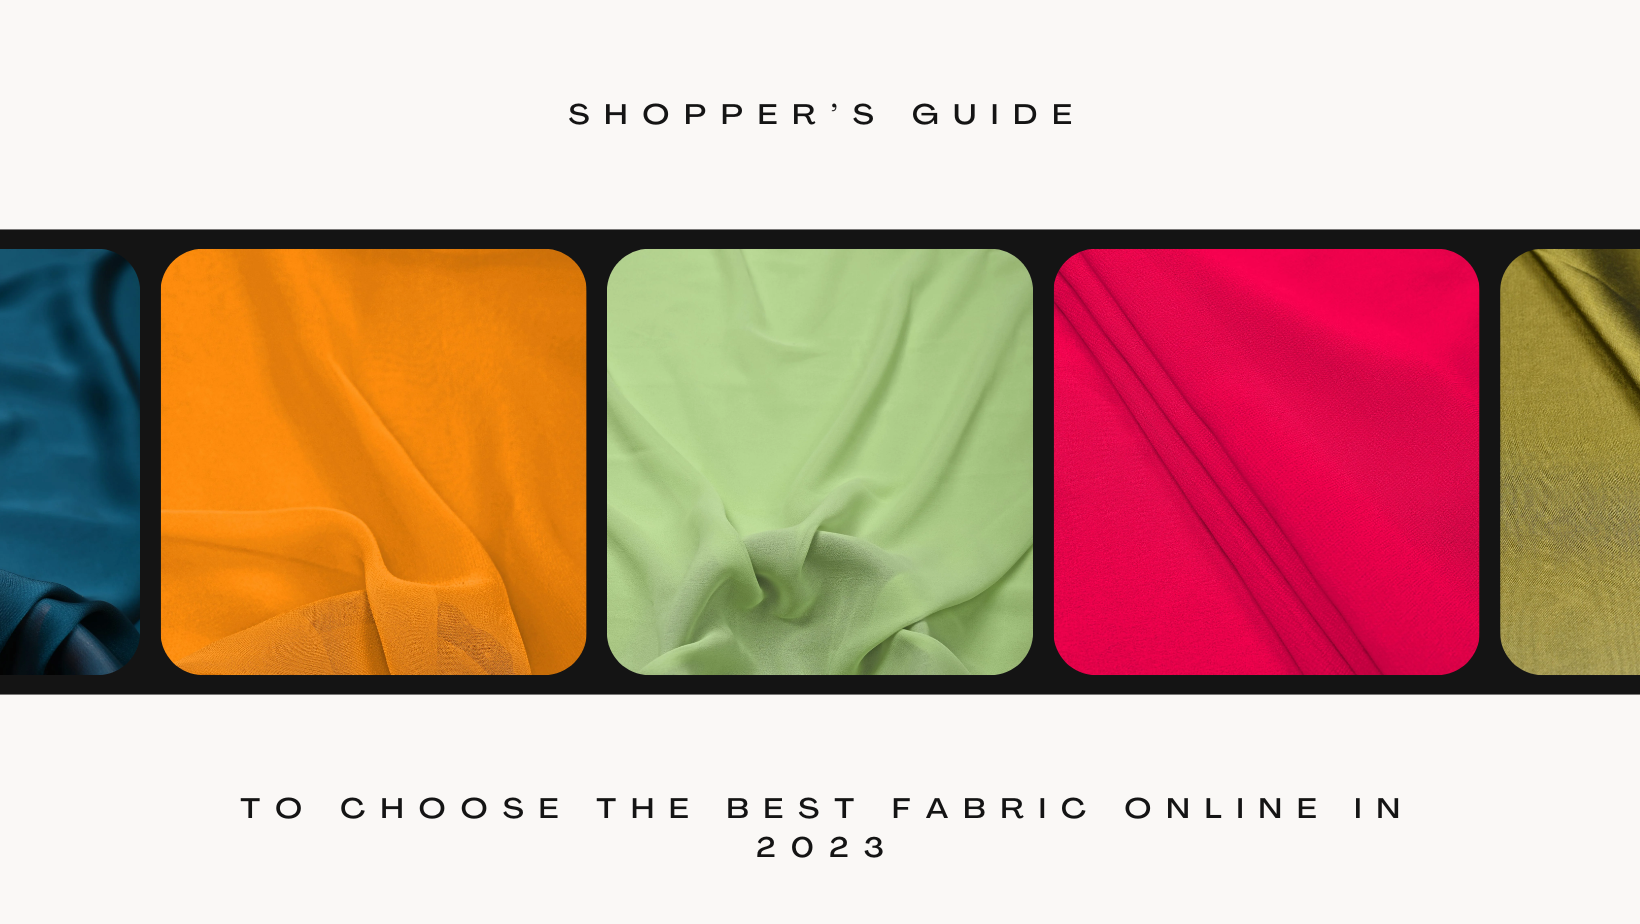 Shopper’s Guide to Choose the Best Fabric Online in 2023